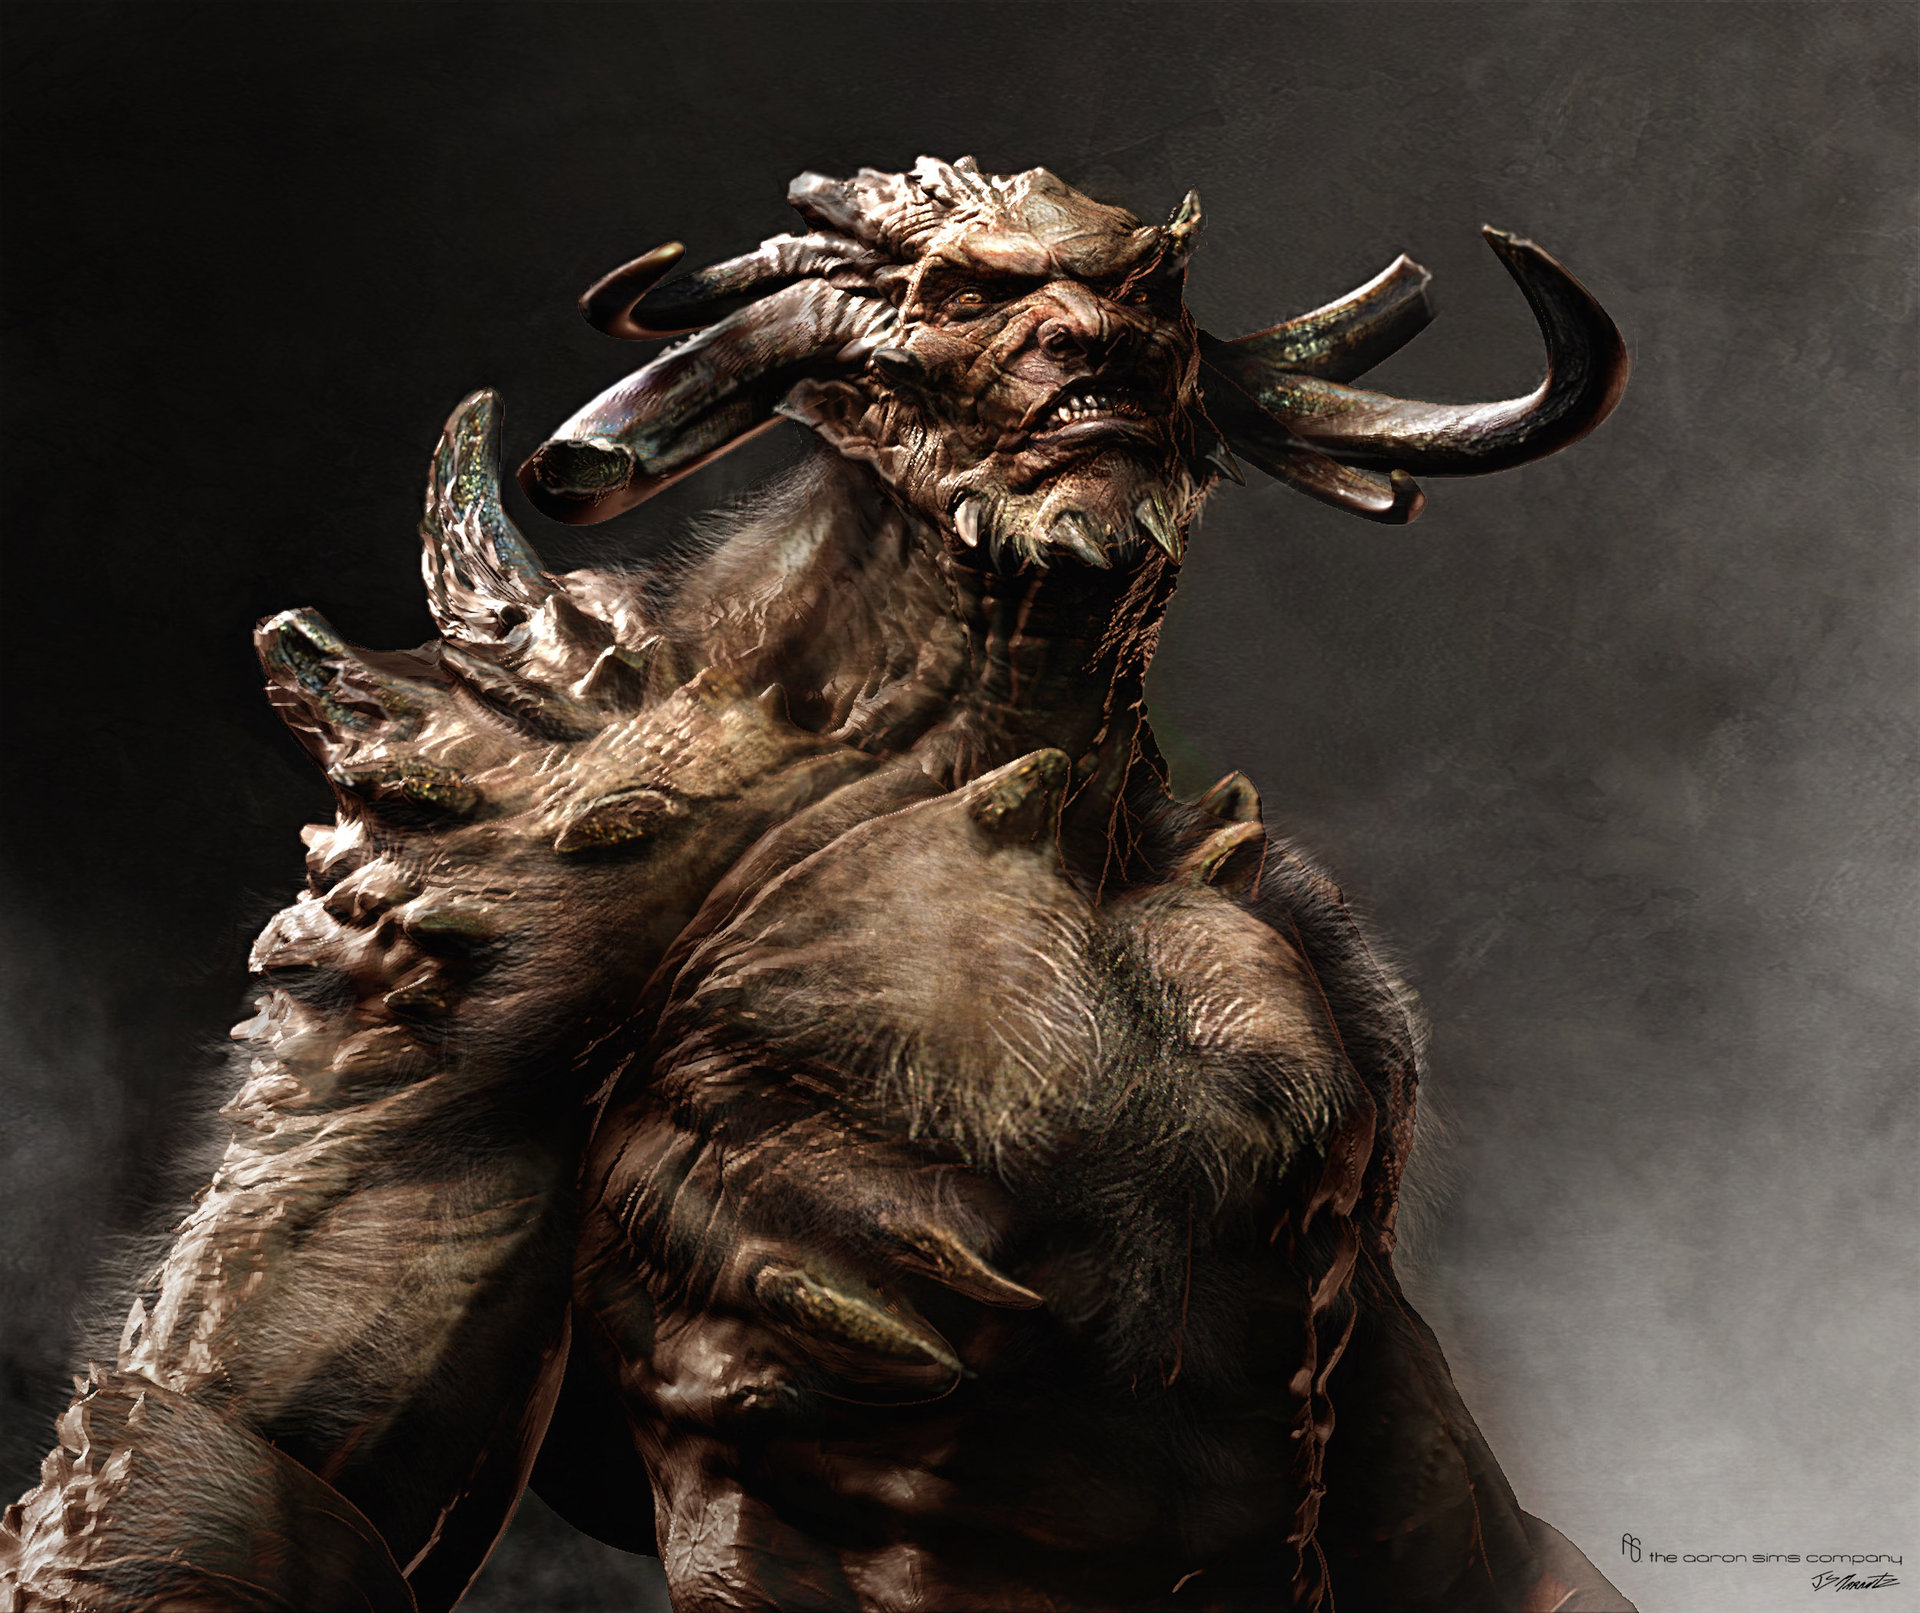 A minotaur wearing Chicago bulls gear wielding the NBA trophy as a great  maul -  Diffusion